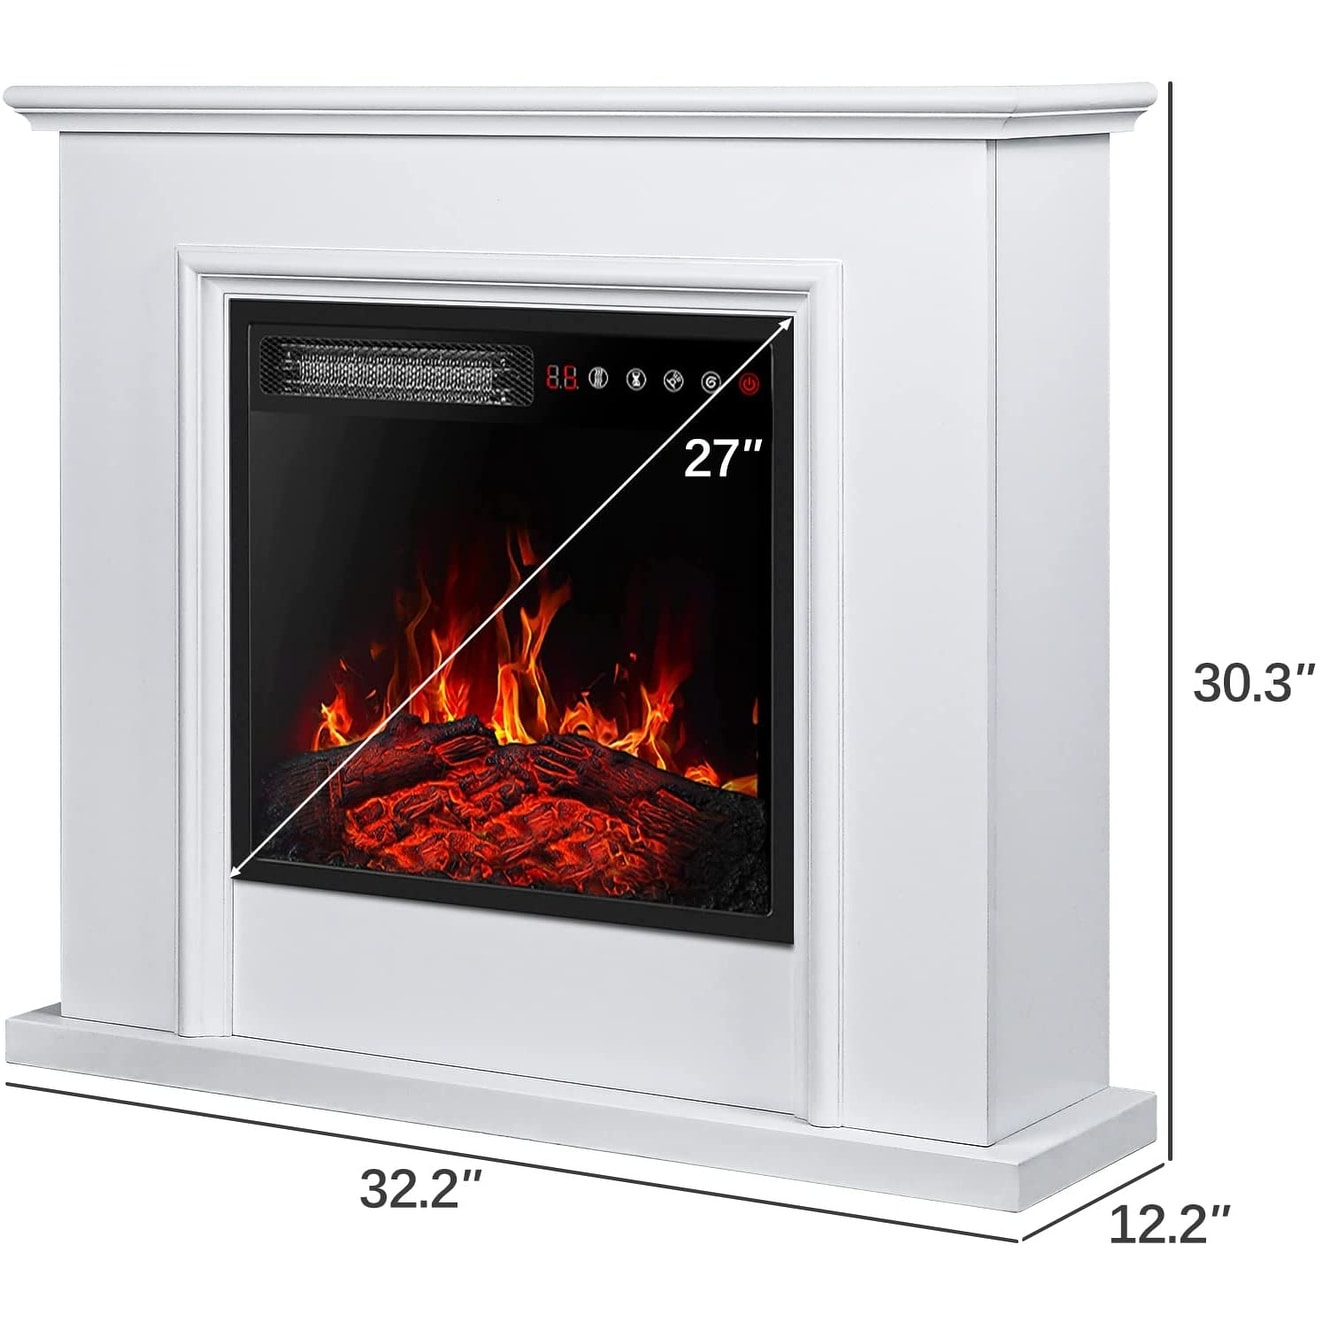 BOSSIN 32 inch Mantel with 27 inch 1500W Electric Fireplace, Package Freestanding Fireplace Heater Corner Firebox